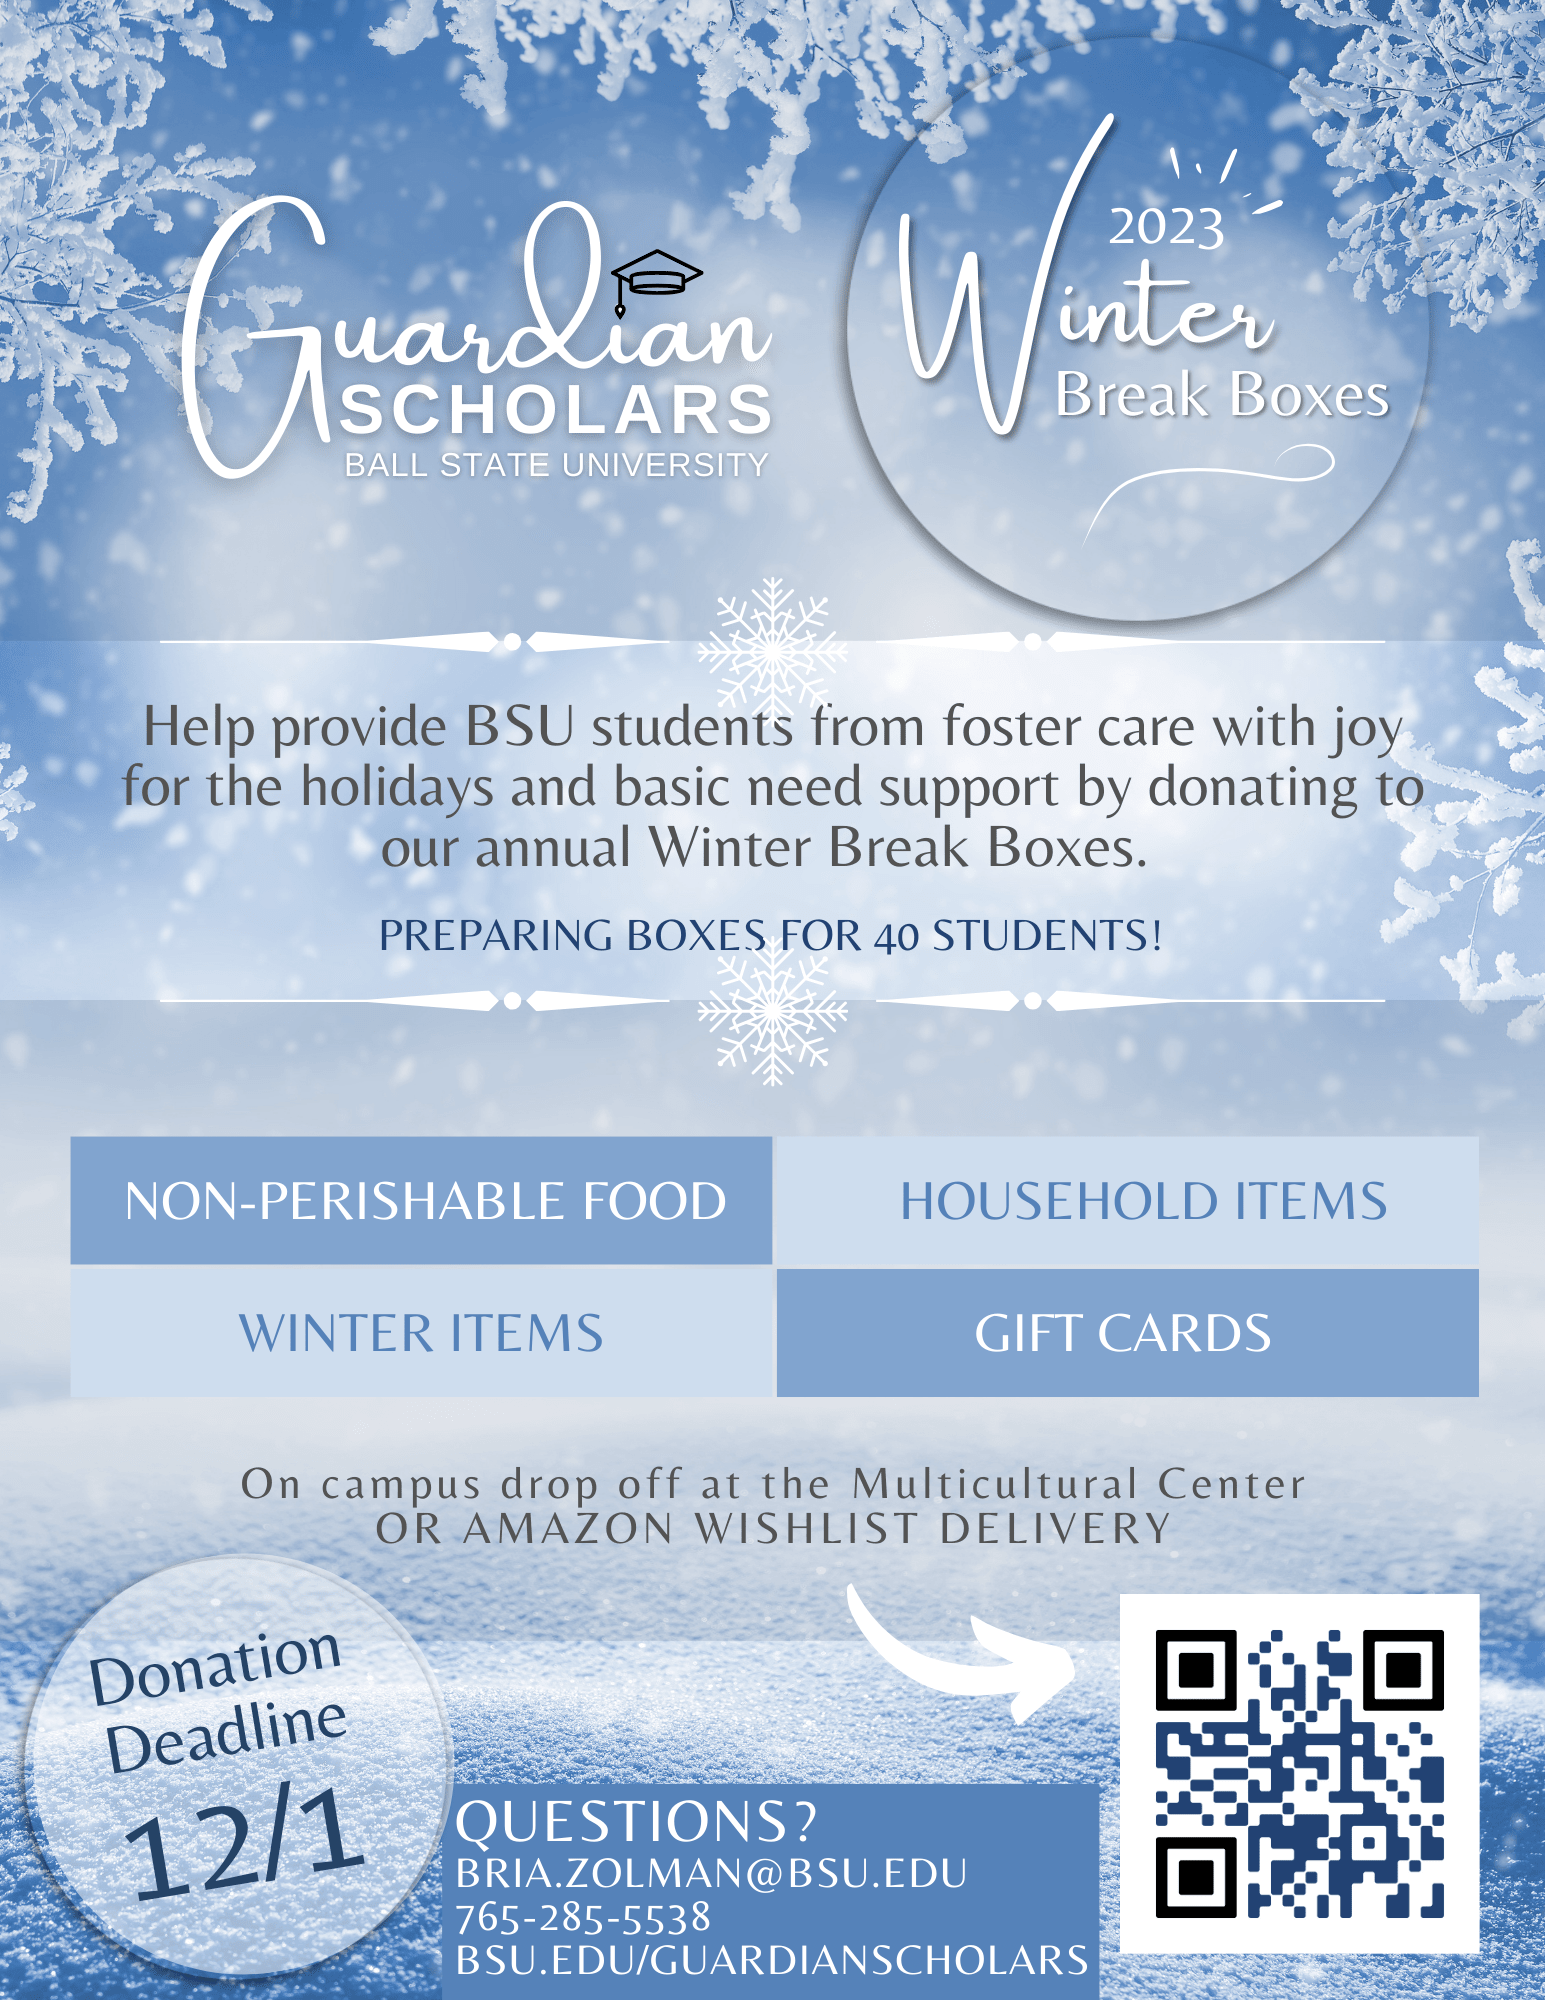 Winter Break Box donation needs: non-perishable food, winter items, household items and gift cards. Donations can be brought to the Multicultural Center by December 1st.